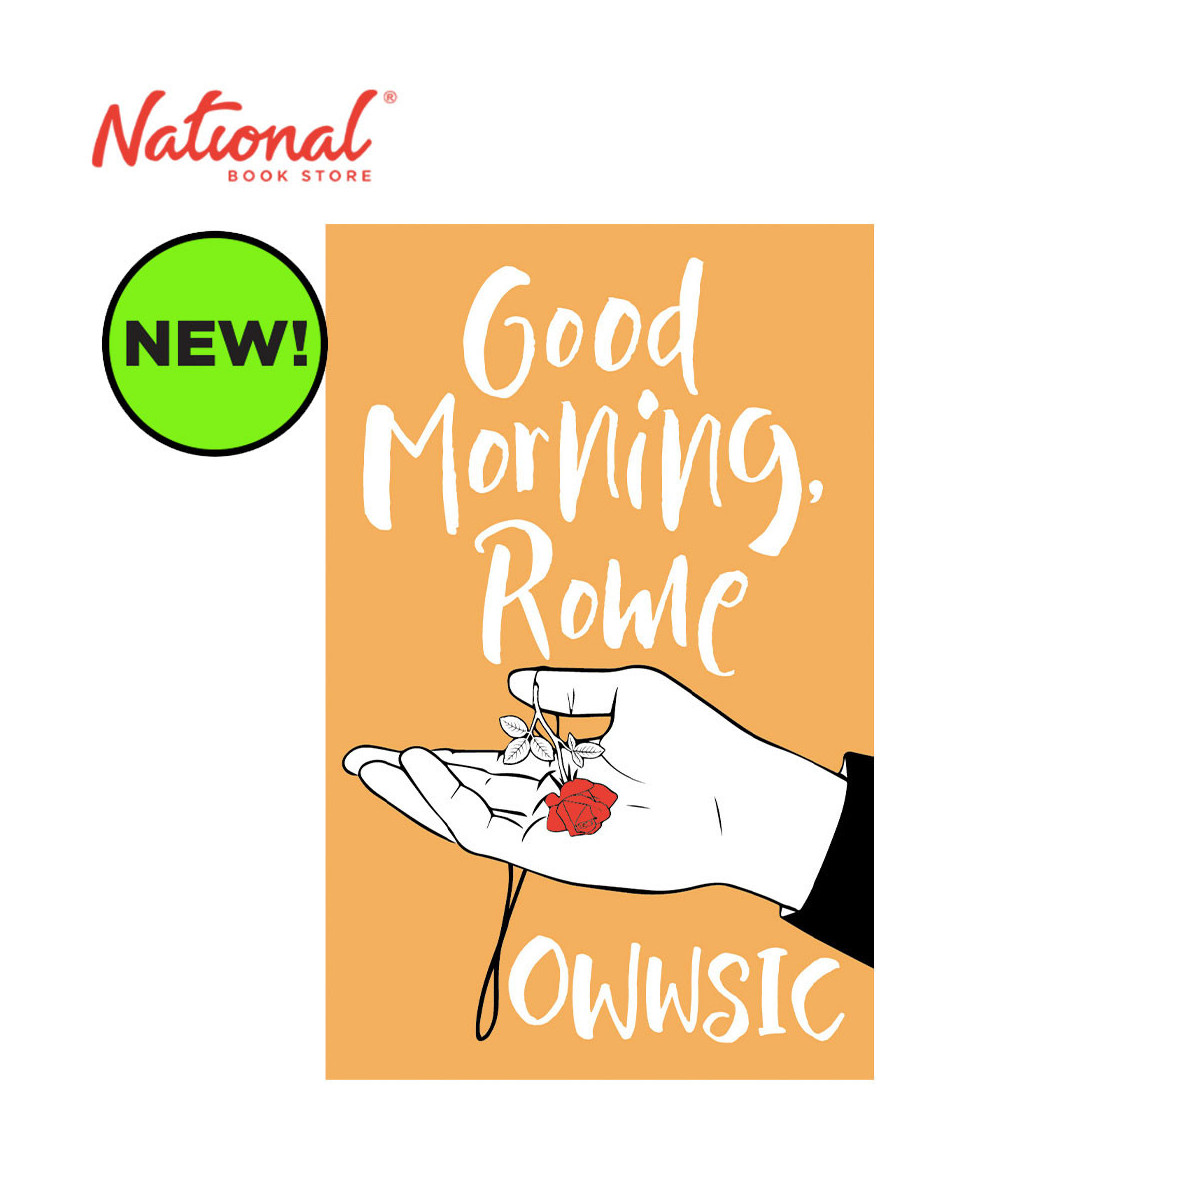 Good Morning, Rome by Owwsic - Trade Paperback